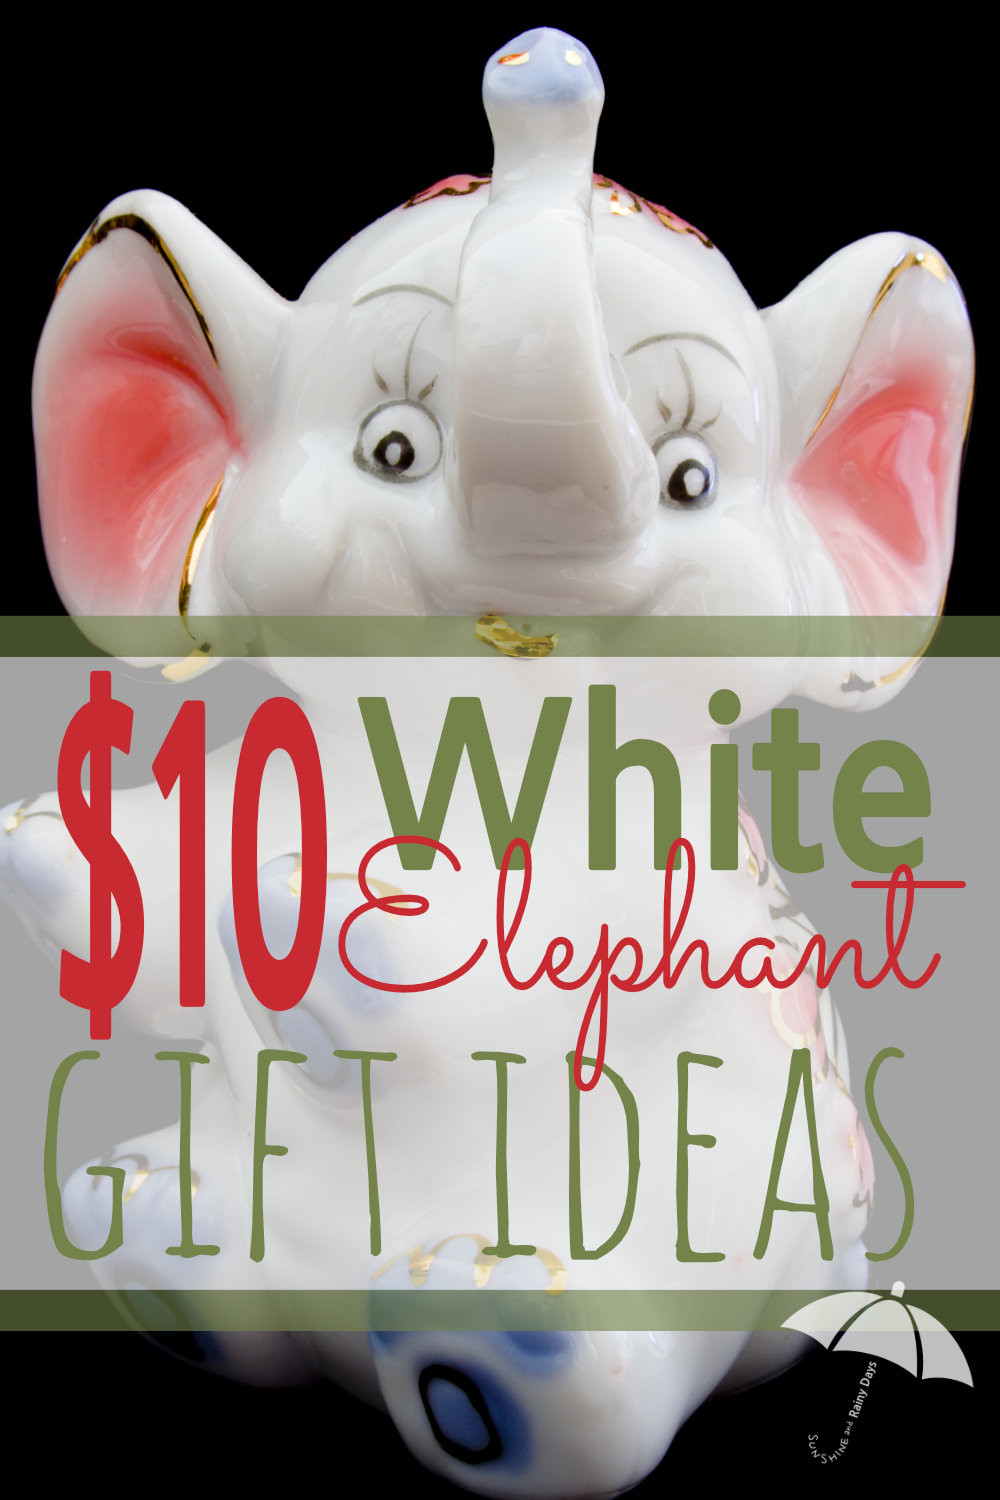 Best ideas about Christmas Gift Exchange Gift Ideas
. Save or Pin $10 White Elephant Gift Exchange Ideas Sunshine and Now.